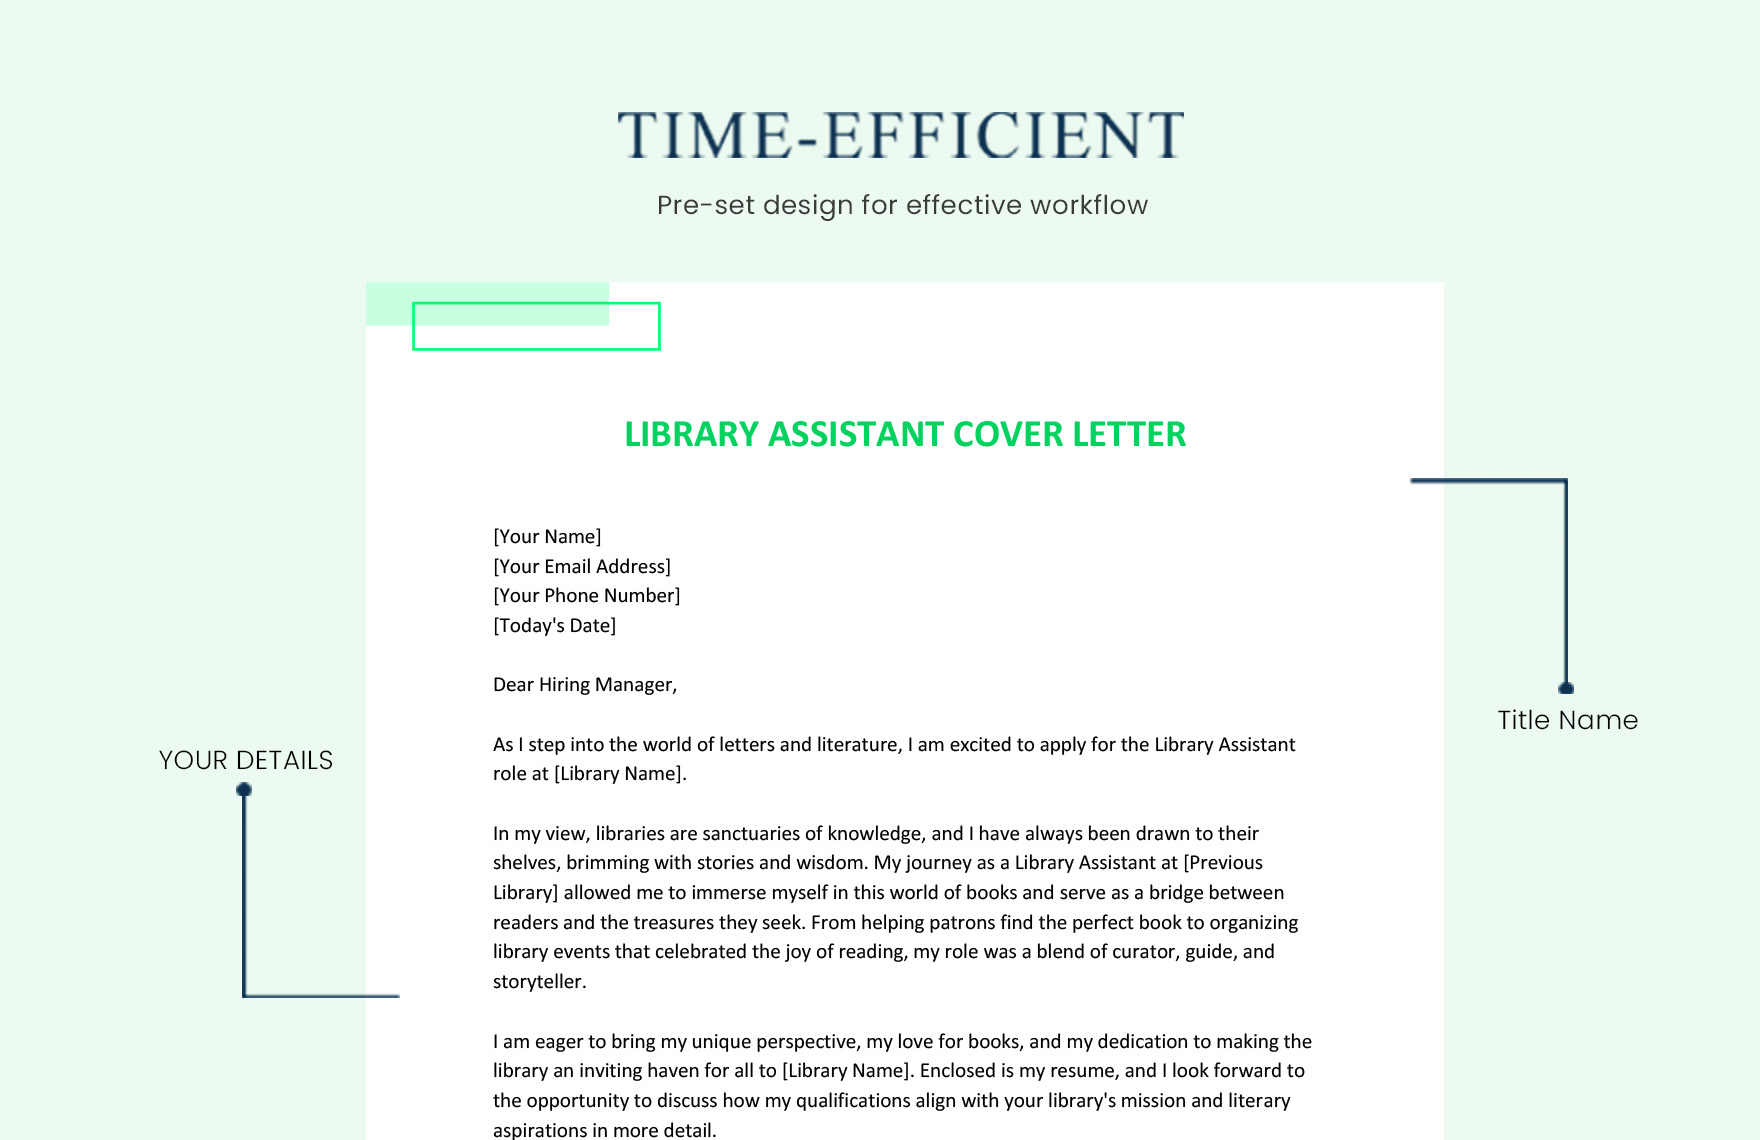 Library Assistant Cover Letter